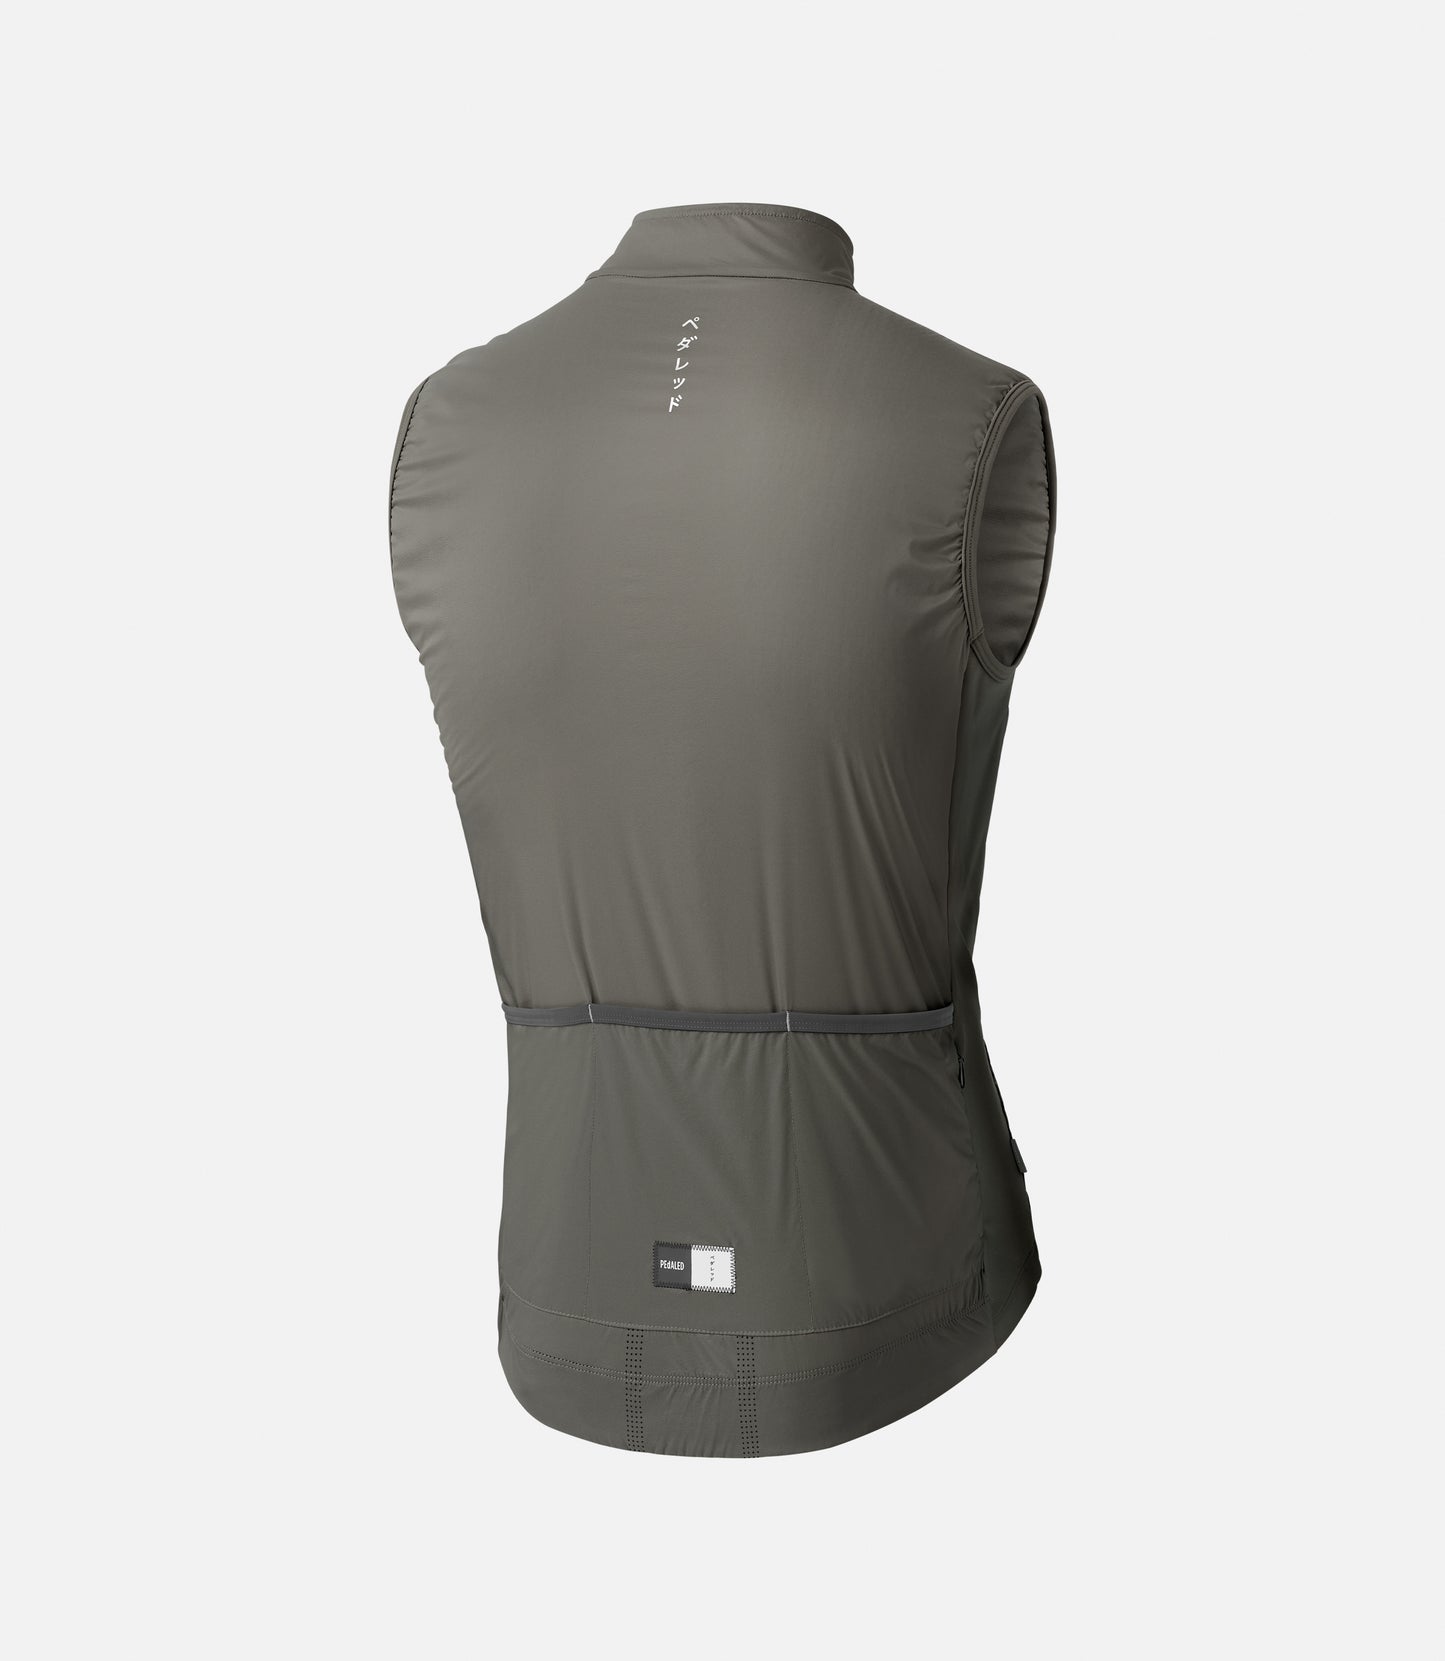 PEdALED ODYSSEY Cycling Vest - Charcoal Gray